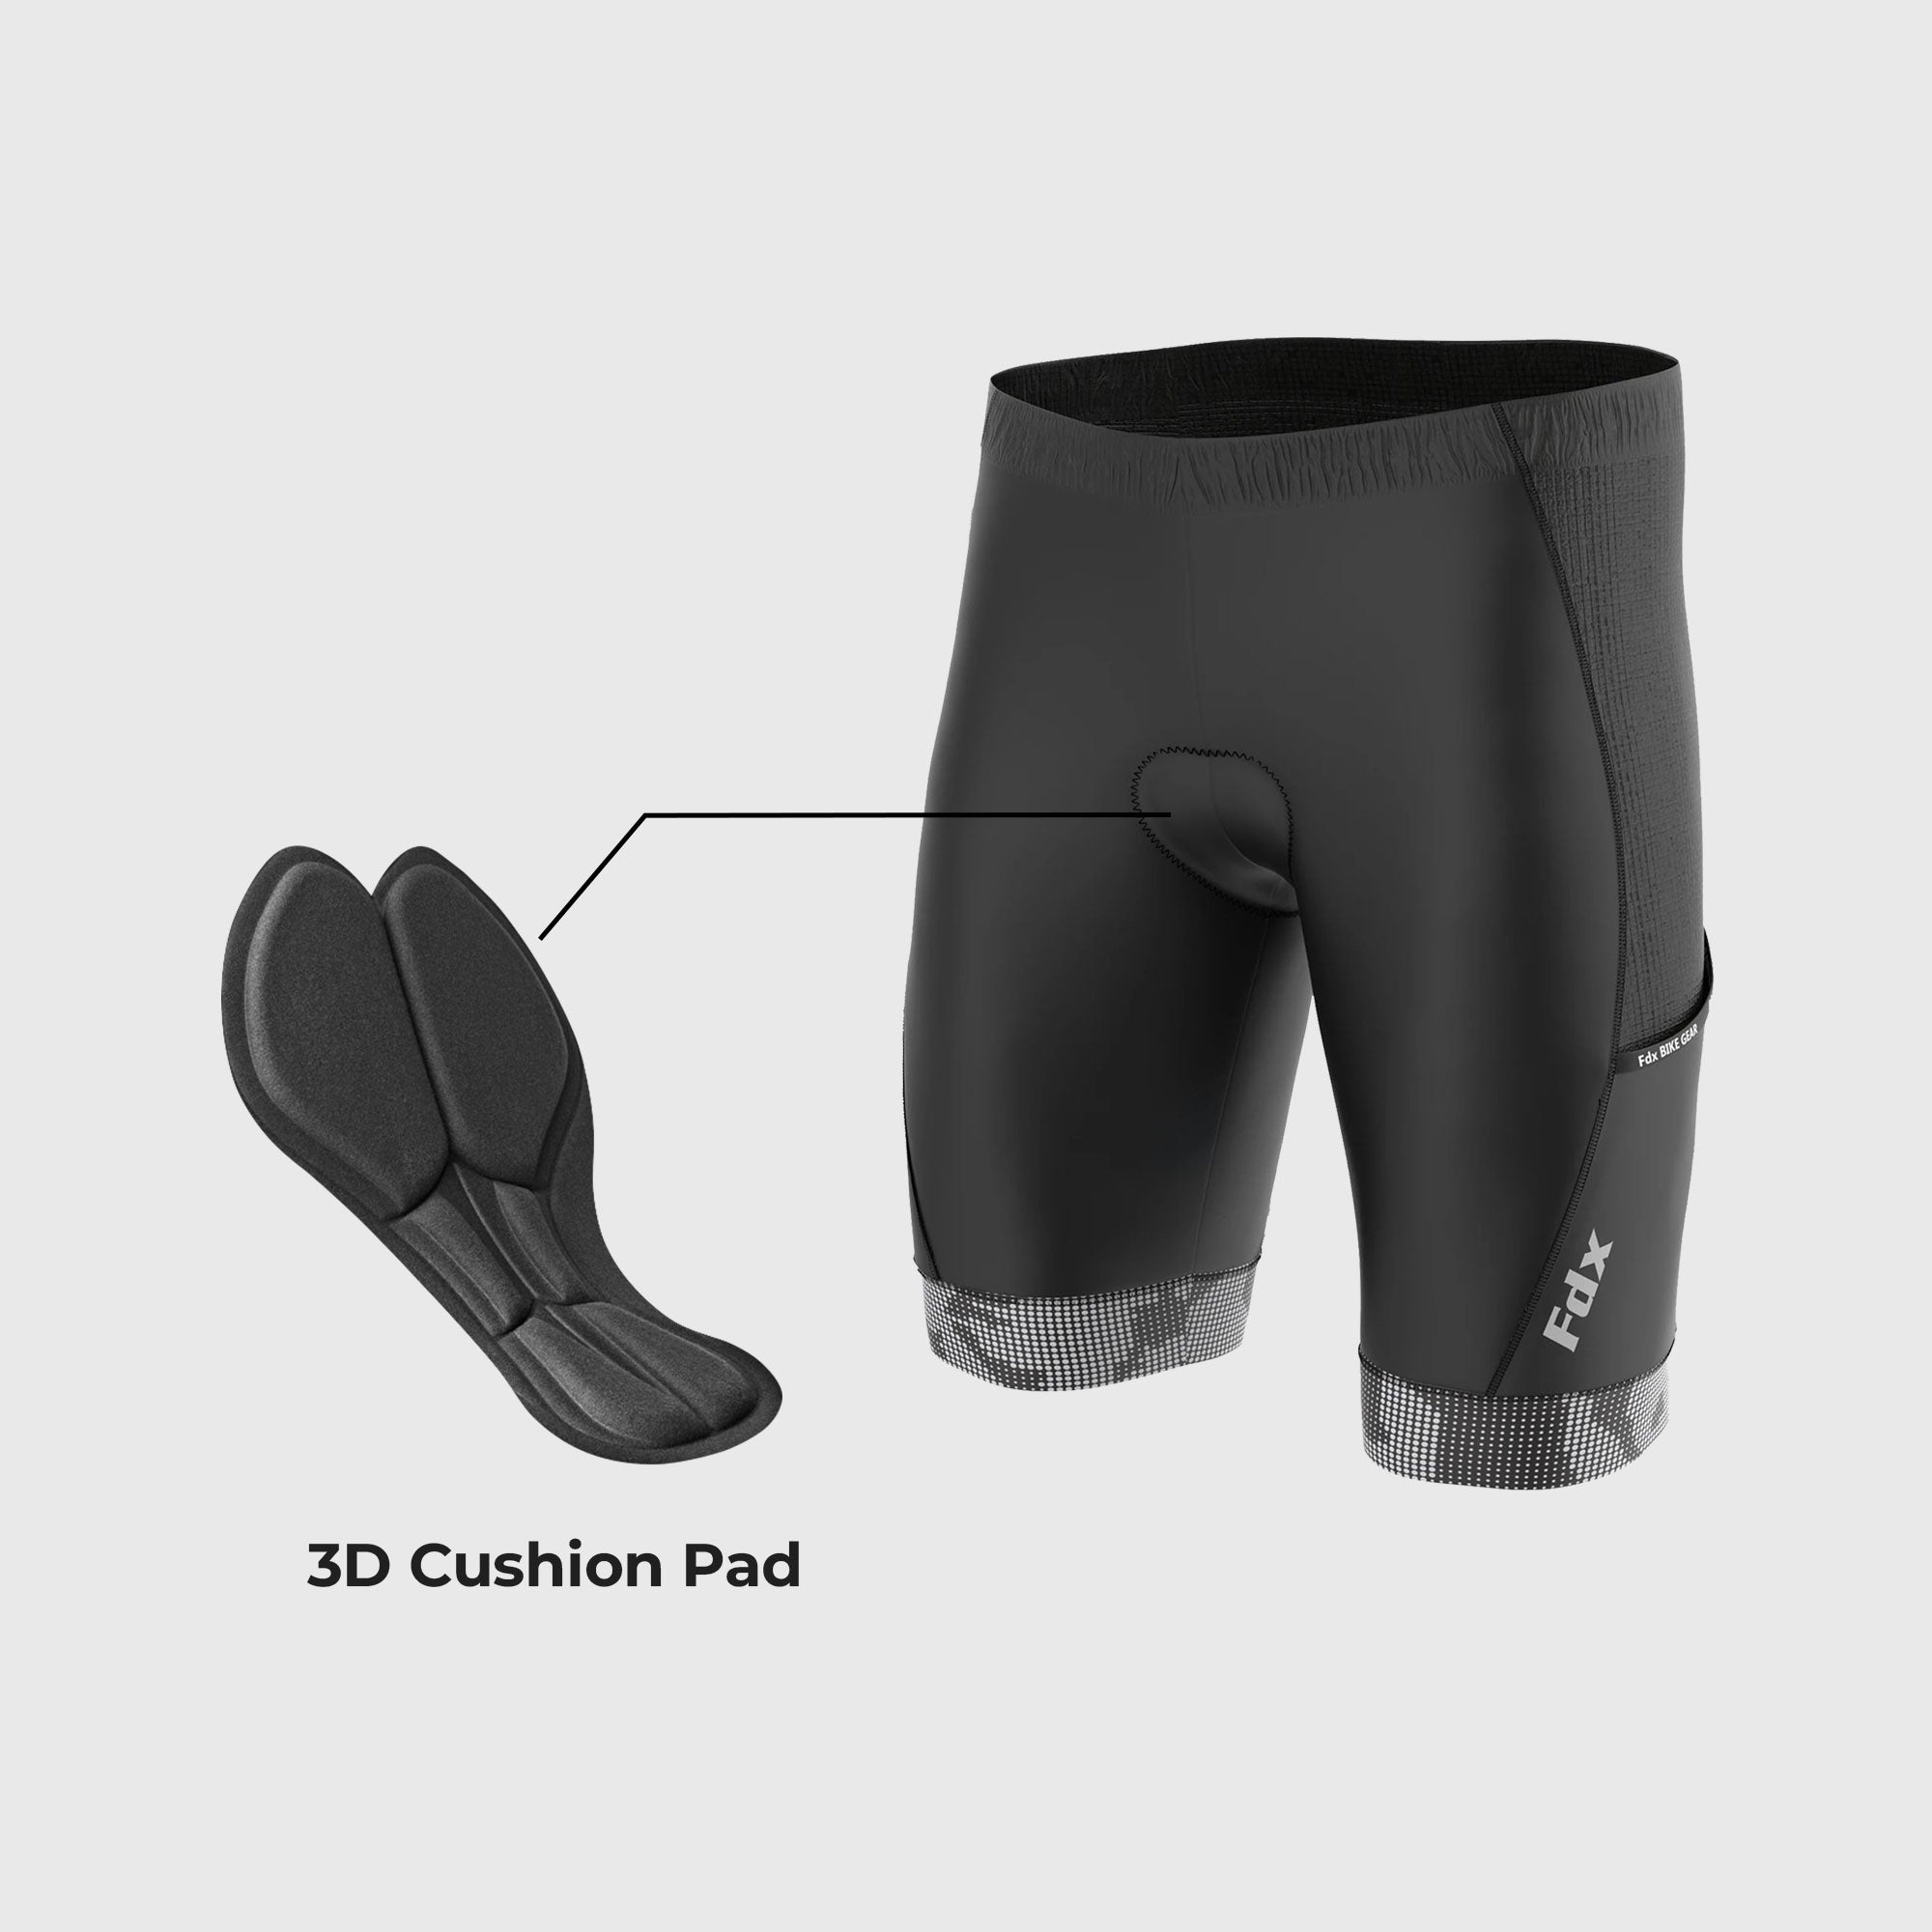 Fdx Mens Black & Grey Gel Padded Cycling Shorts for Summer Best Outdoor Knickers Road Bike Short Length Pants - All Day